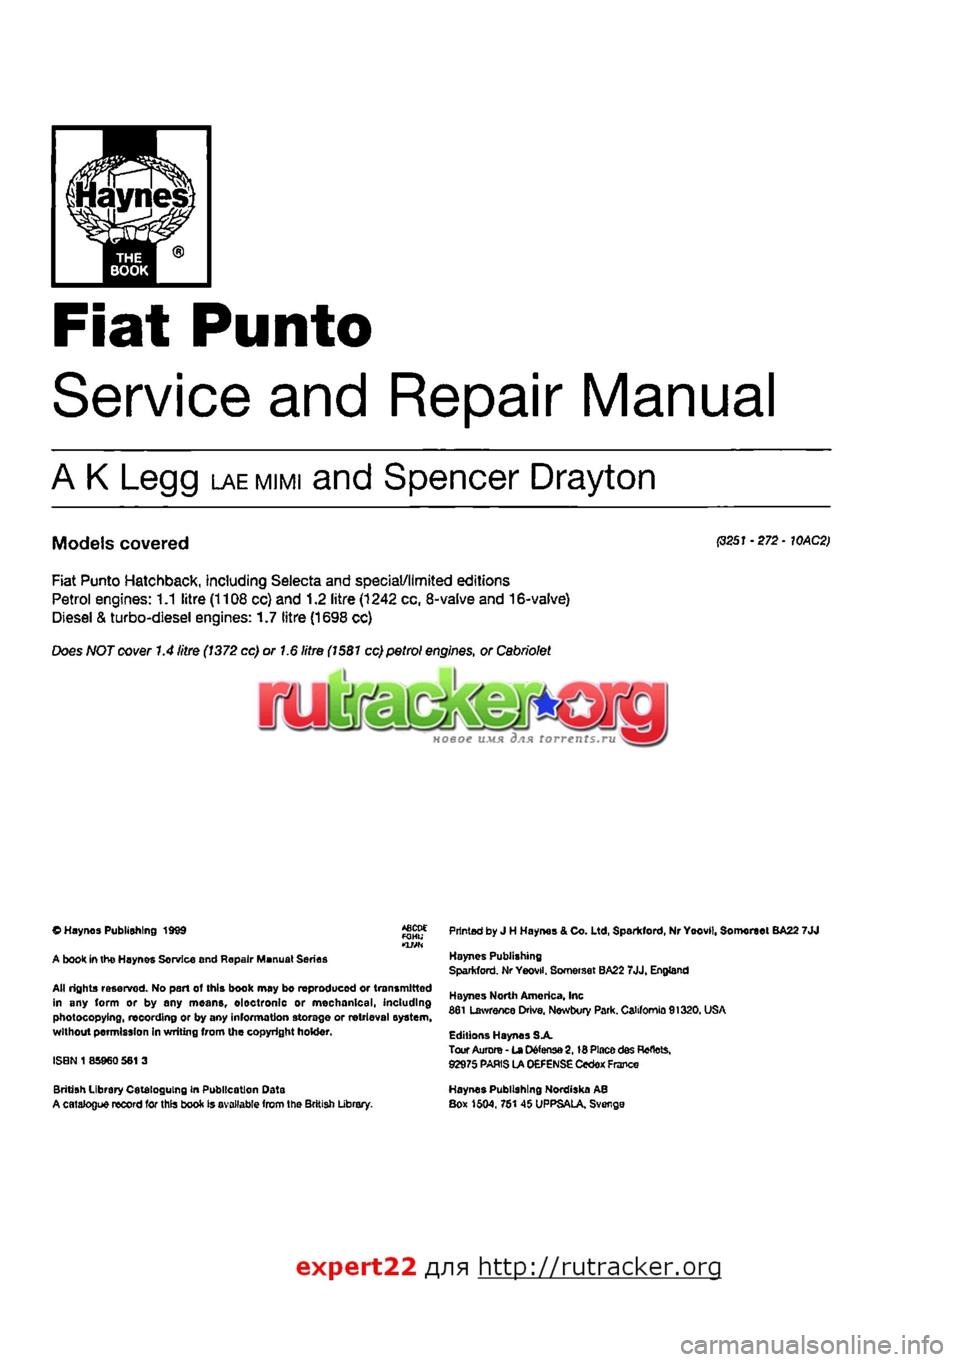 FIAT PUNTO 1995 176 / 1.G Workshop Manual 
Fiat Punto 
Service and Repair Manual 
A K Legg LAEMIMI and Spencer Drayton 
Models covered P251 •272 • WAC2> 
Fiat Punto Hatchback, including Selecta and special/limited editions Petrol engines: